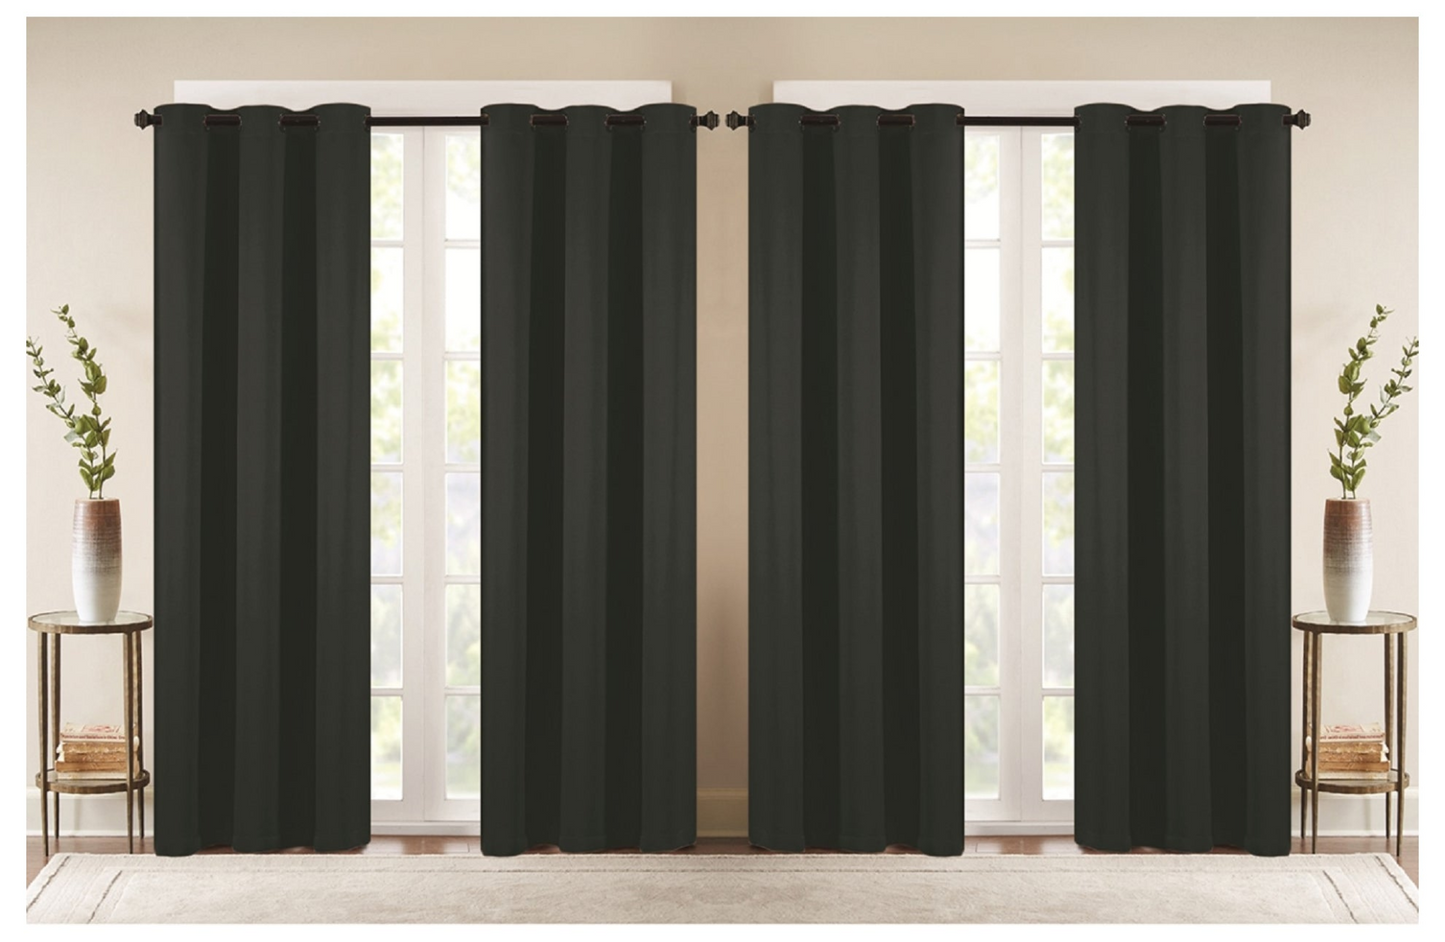 J&V TEXTILES 4-Panels: Room Darkening Thermal Insulated Blackout Grommet Window Curtain Panels for Living Room, Goodies N Stuff